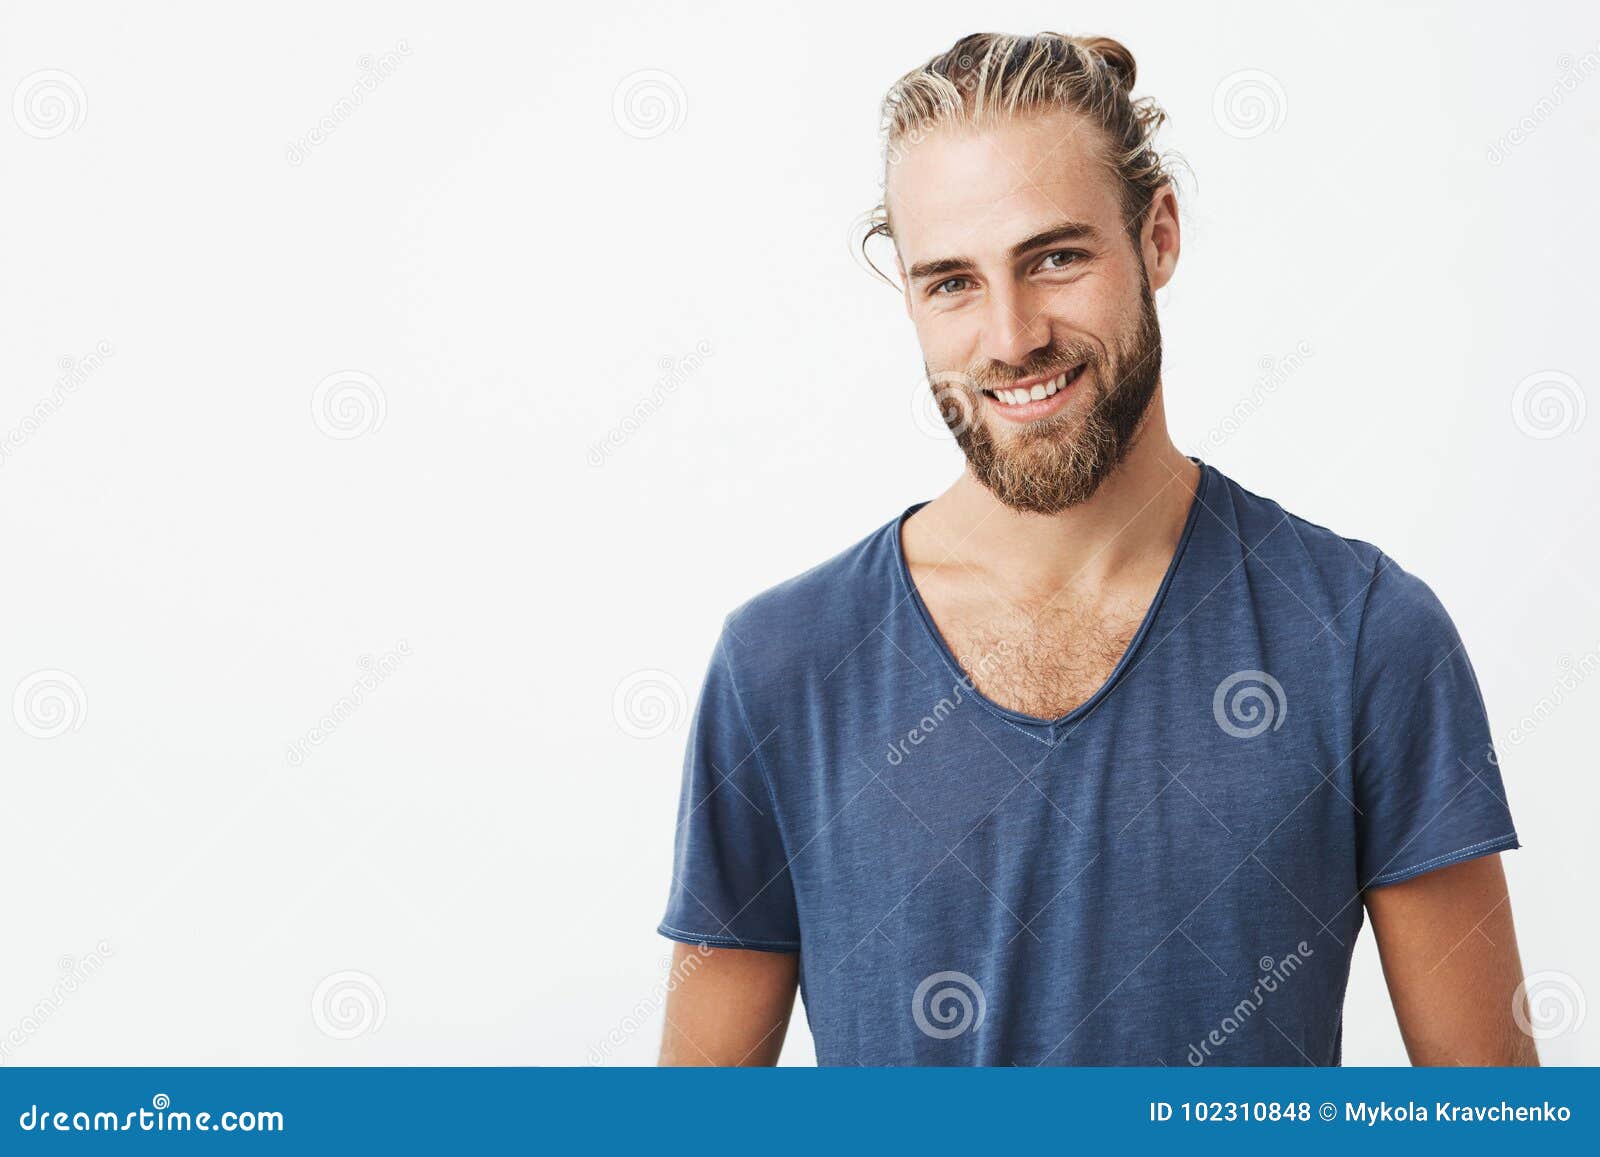 Portrait of Good-looking Nordic Unshaven Man with Fashionable Hairdo ...